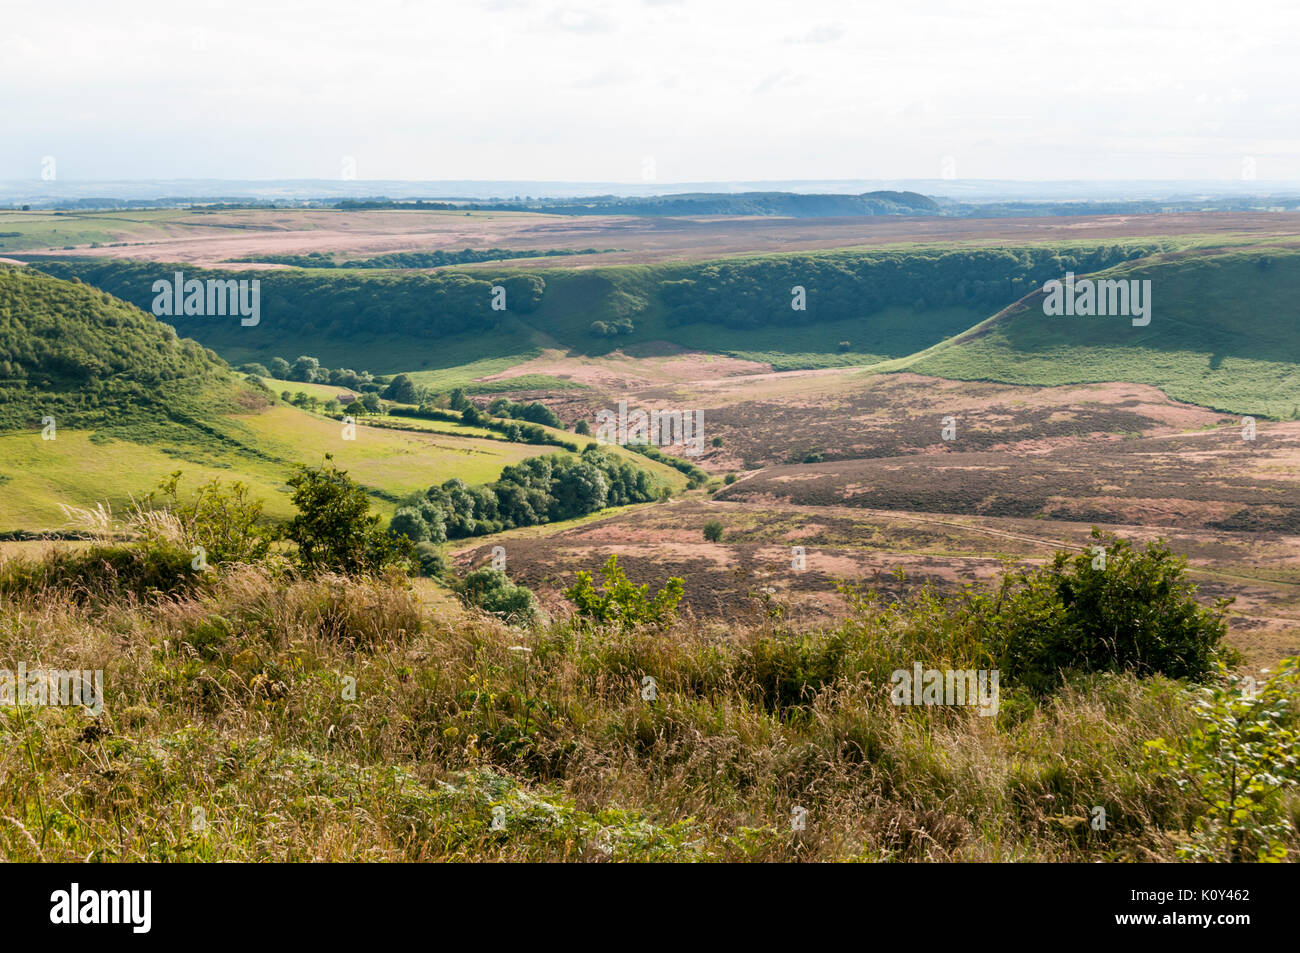 The Hole of Horcum in the valley of Levisham Beck on the North York Moors is up to 400 ft deep and 0.75 mile across. Stock Photo